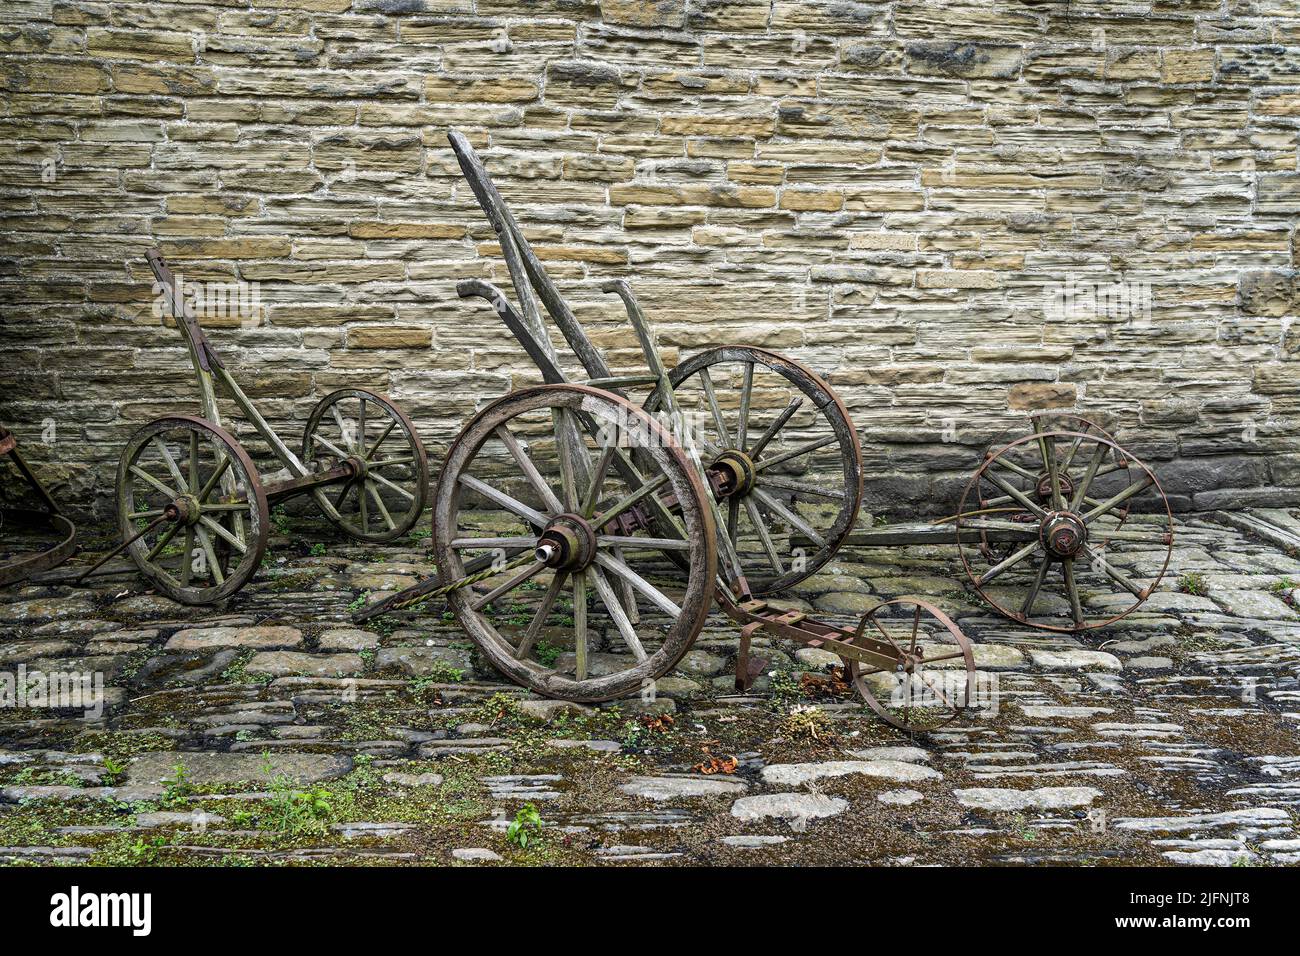 Ancient wooden ploughs Stock Photo